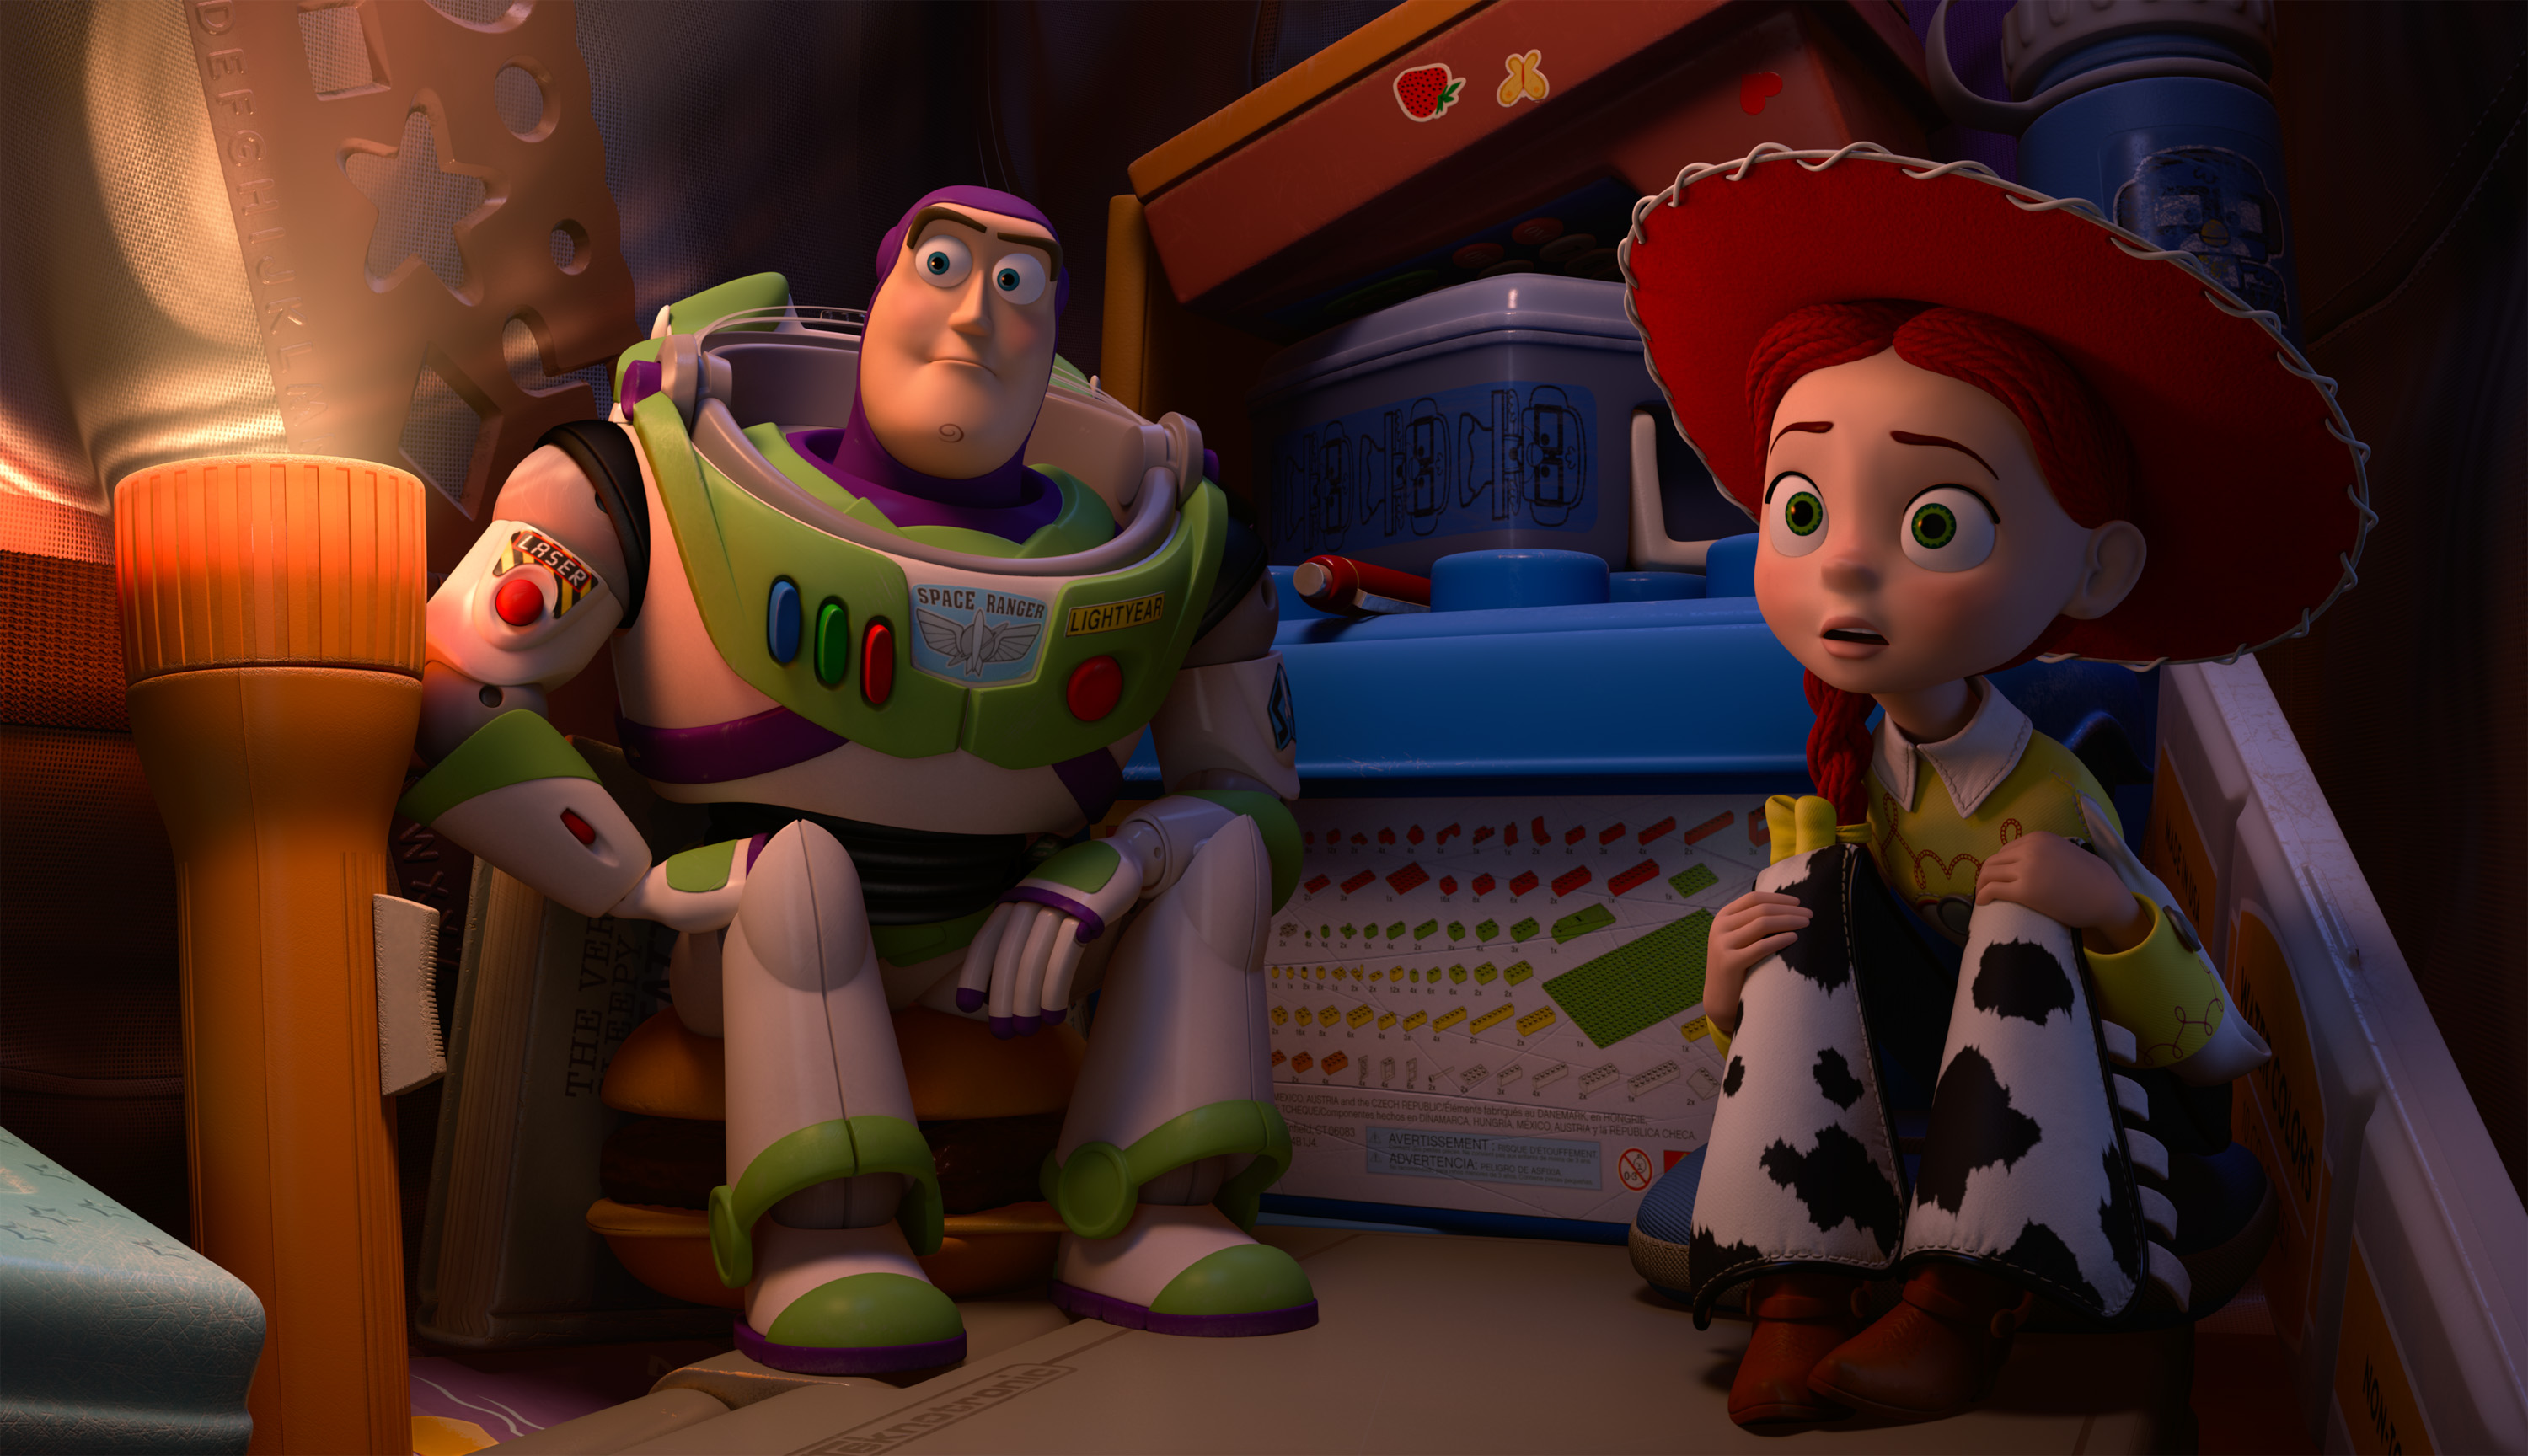 Amazing Toy Story Of Terror! Pictures & Backgrounds